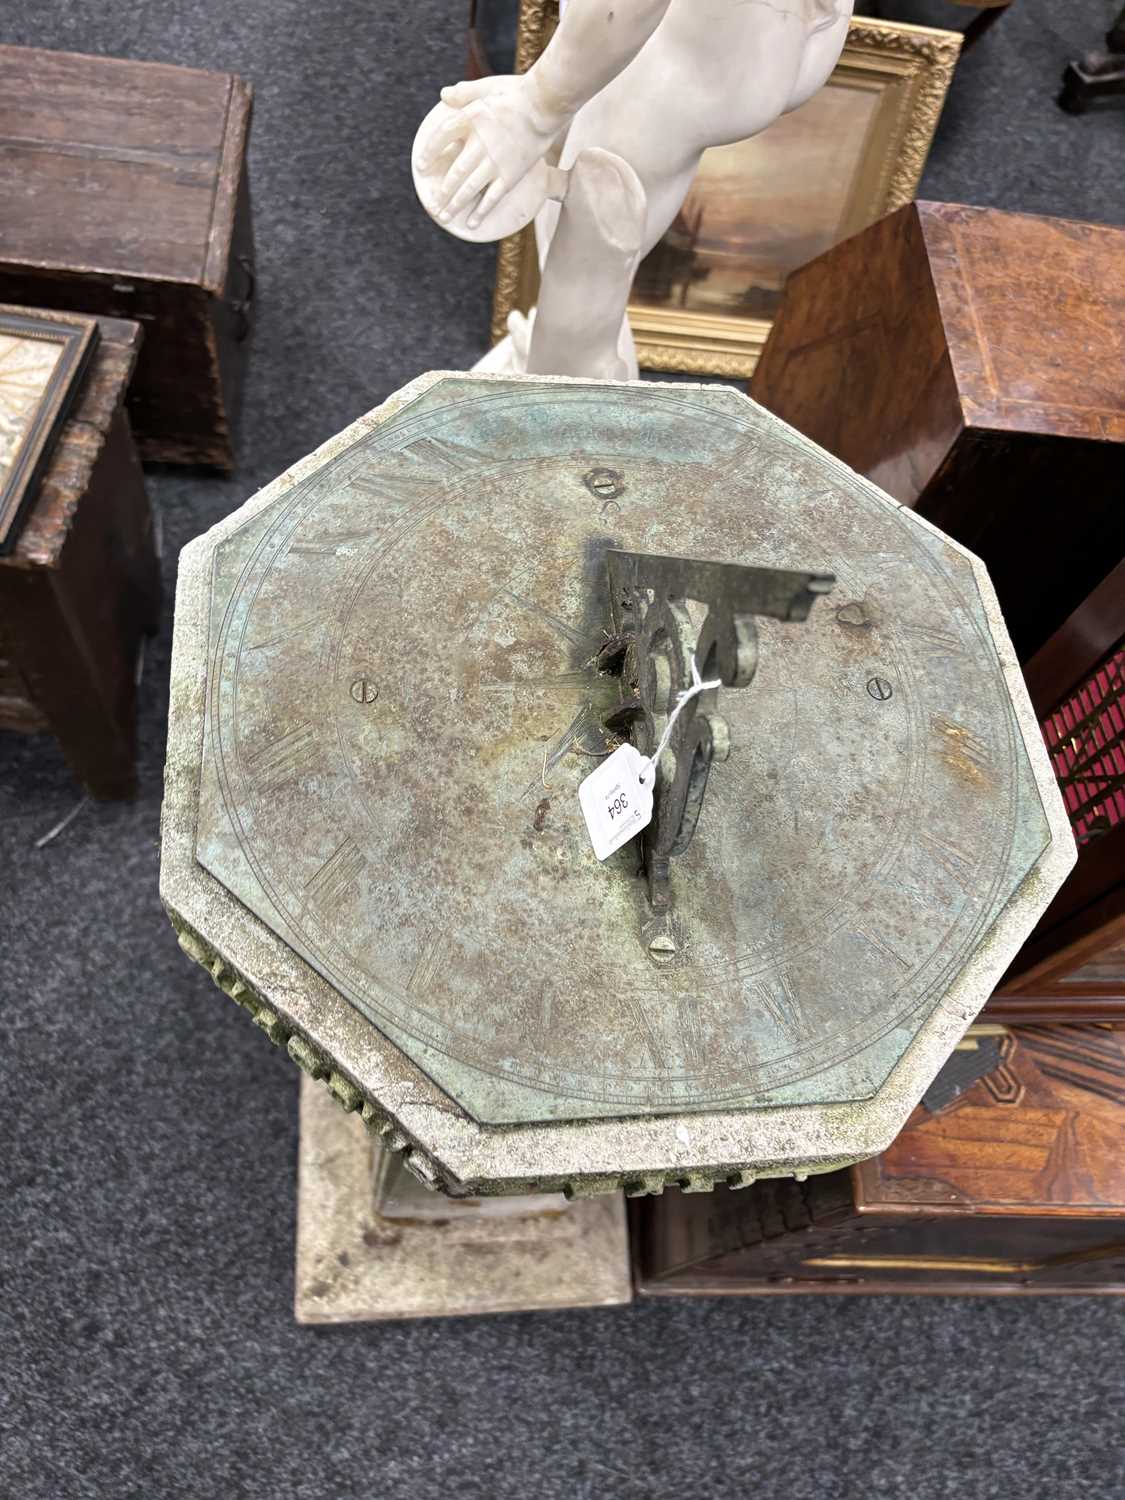 AN EARLY 18TH CENTURY BRONZE SUNDIAL DATED 1717 RAISED ON AN ARTS AND CRAFTS COMPOSITE STONE BASE - Image 12 of 17